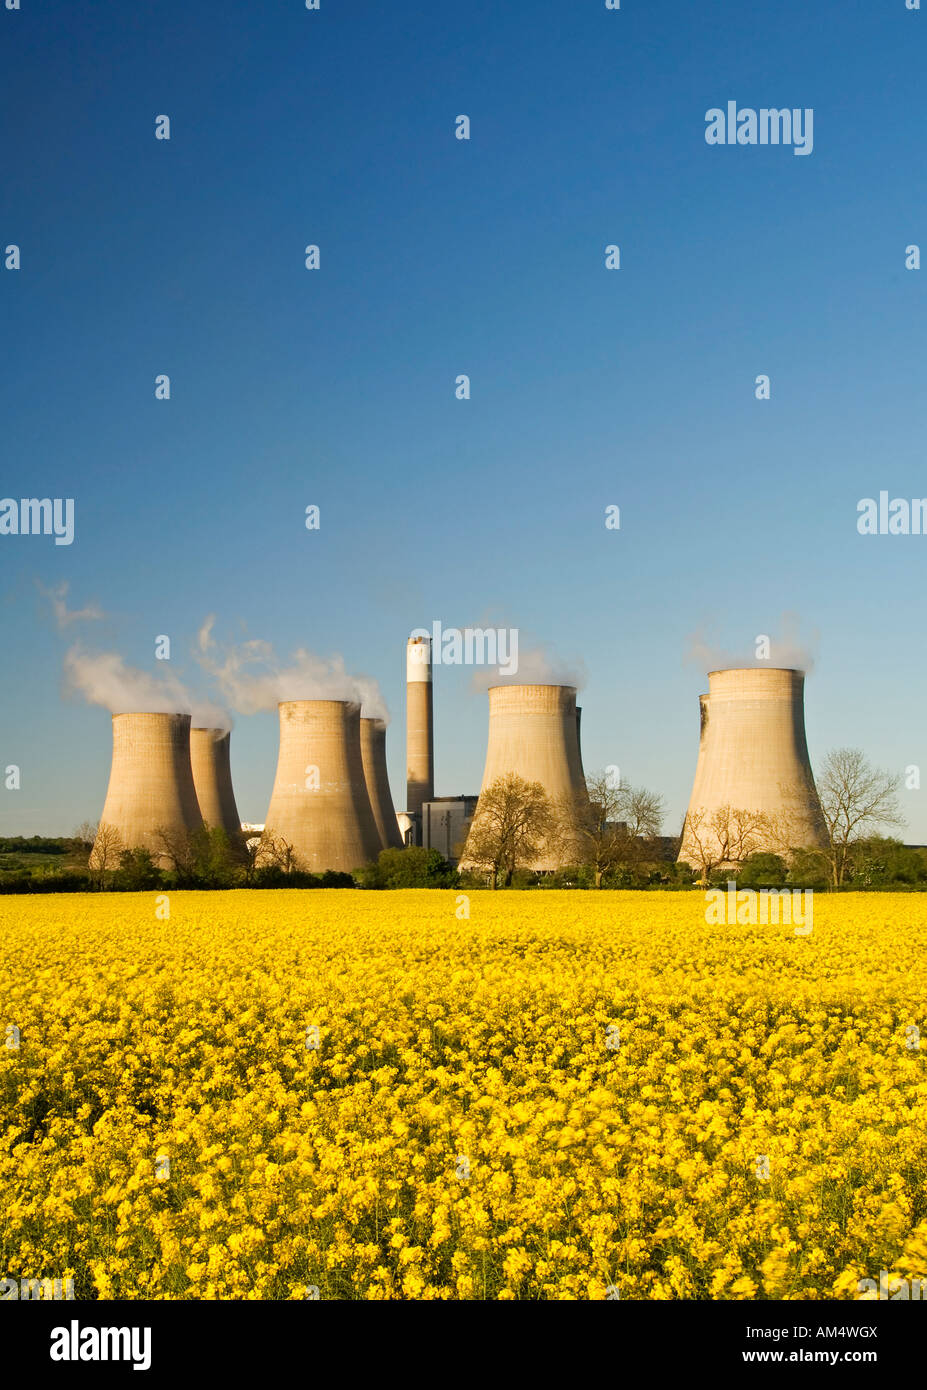 Coal Fired Power Station and Rapeseed Field, Ratcliffe on Soar, Near Nottingham, East Midlands, England, UK Stock Photo